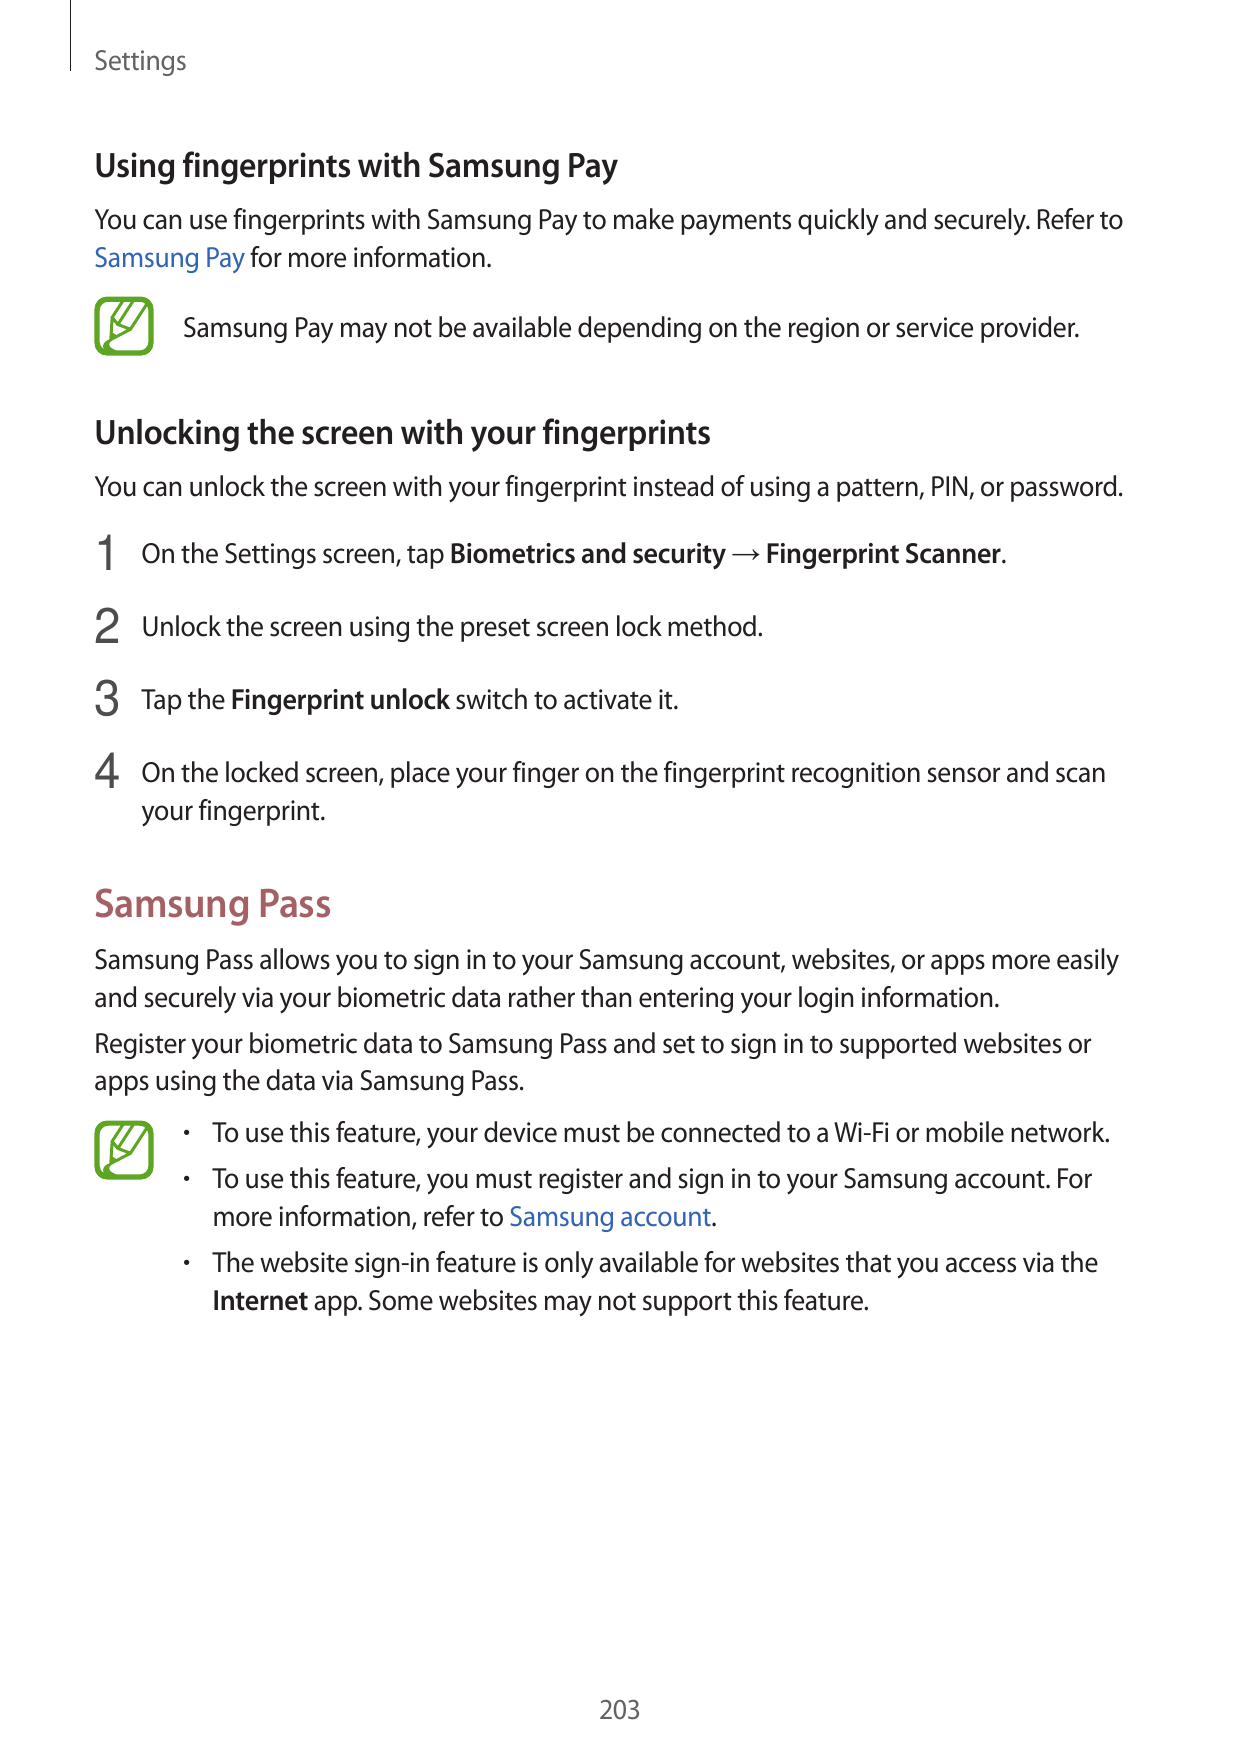 SettingsUsing fingerprints with Samsung PayYou can use fingerprints with Samsung Pay to make payments quickly and securely. Refe